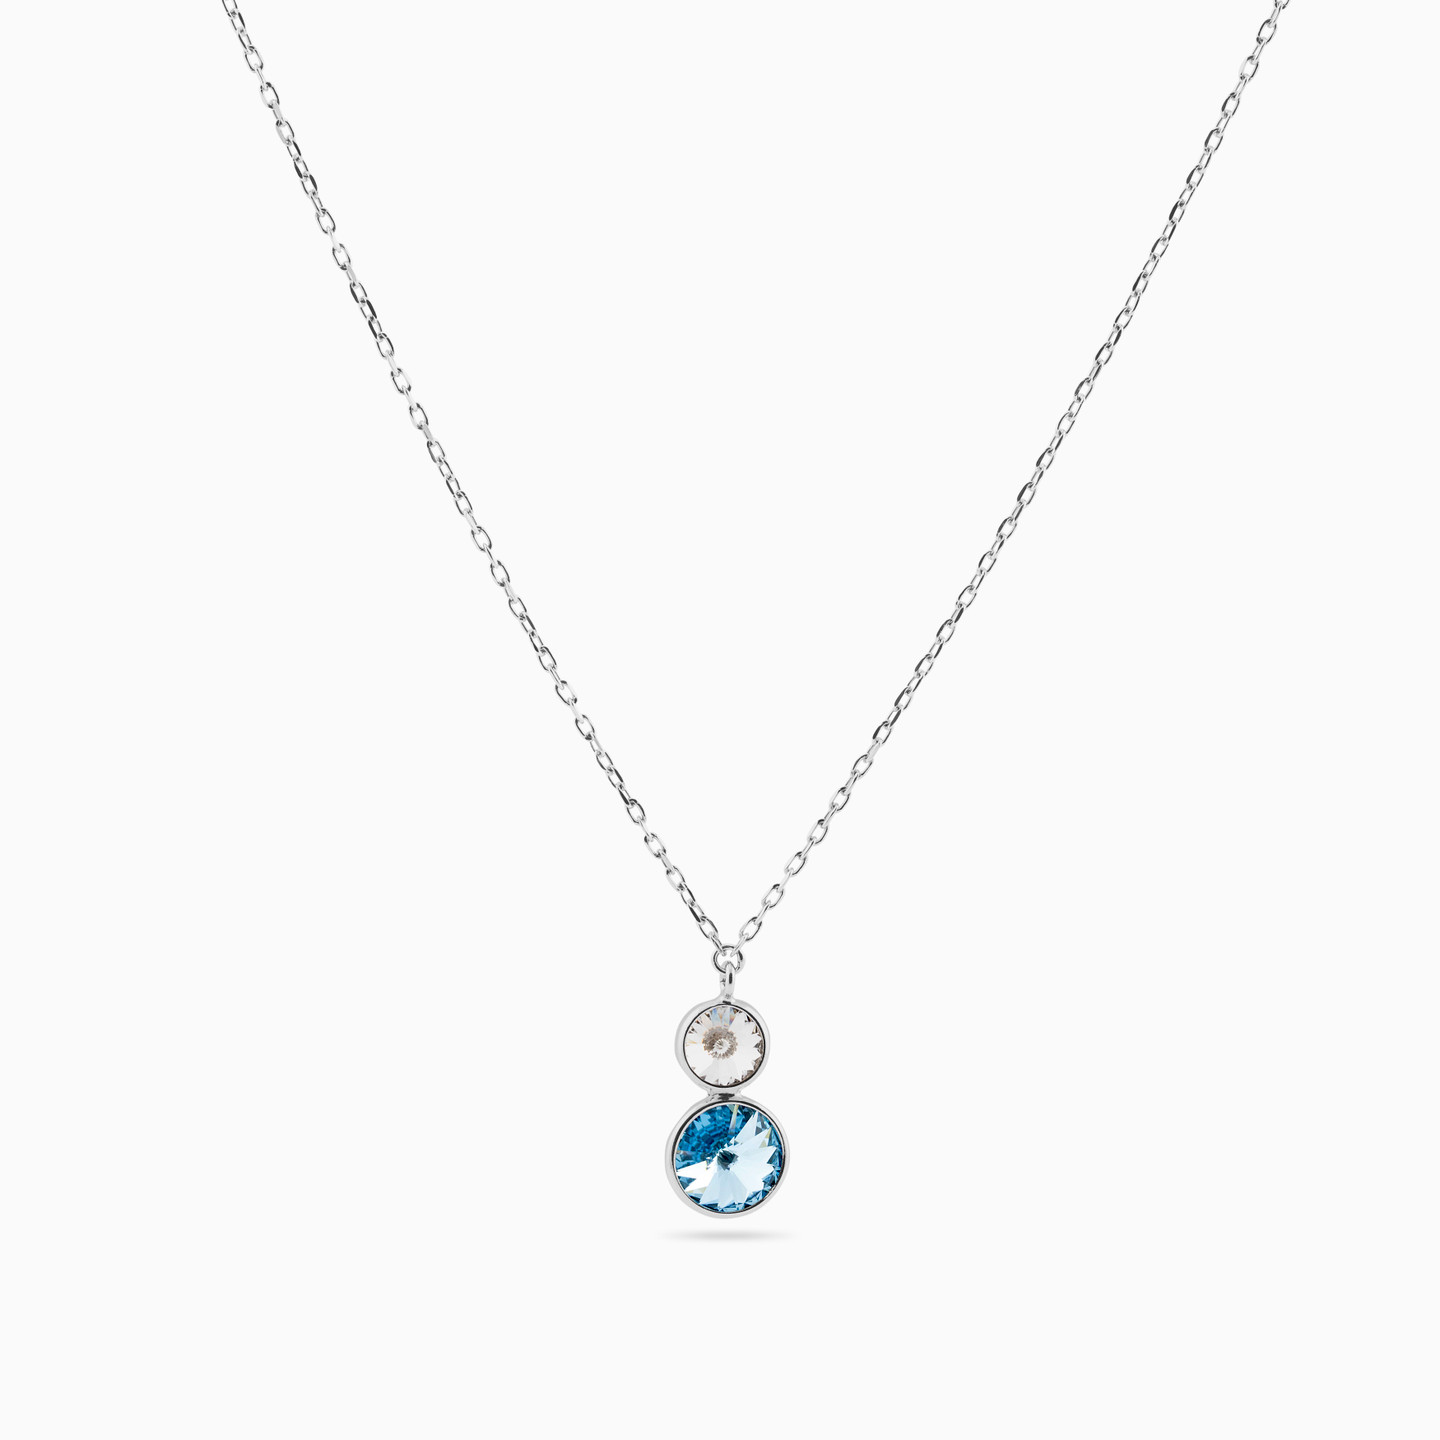 Sterling Silver Colored Stones Pendant Necklace - 3